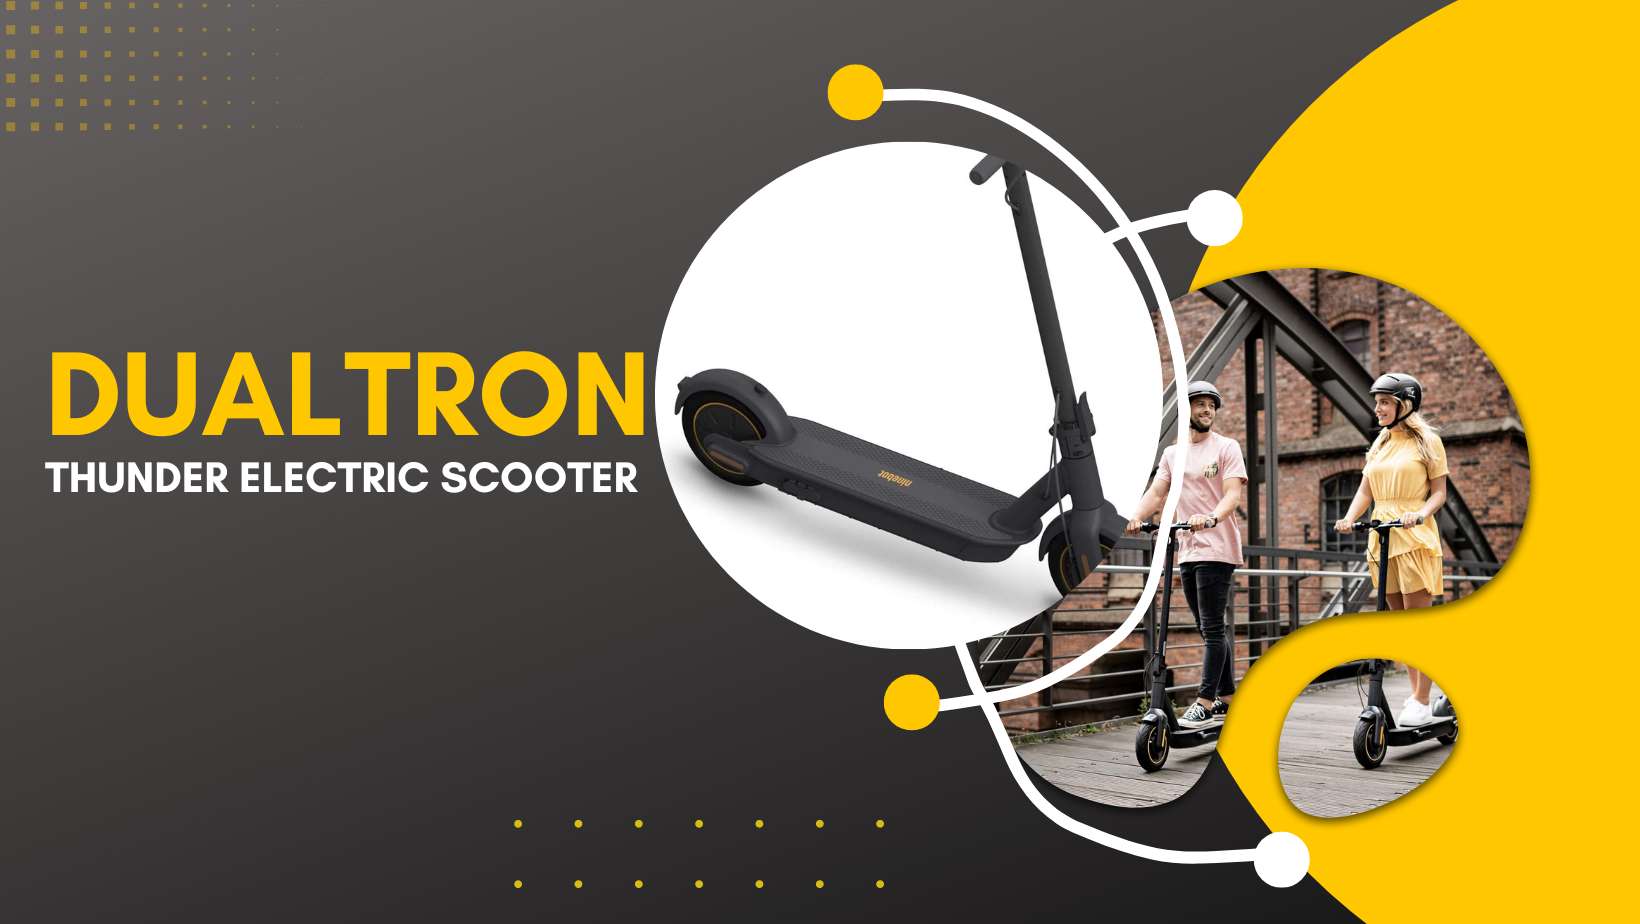 Dualtron Thunder Electric Scooter – A Beast on Two Wheels